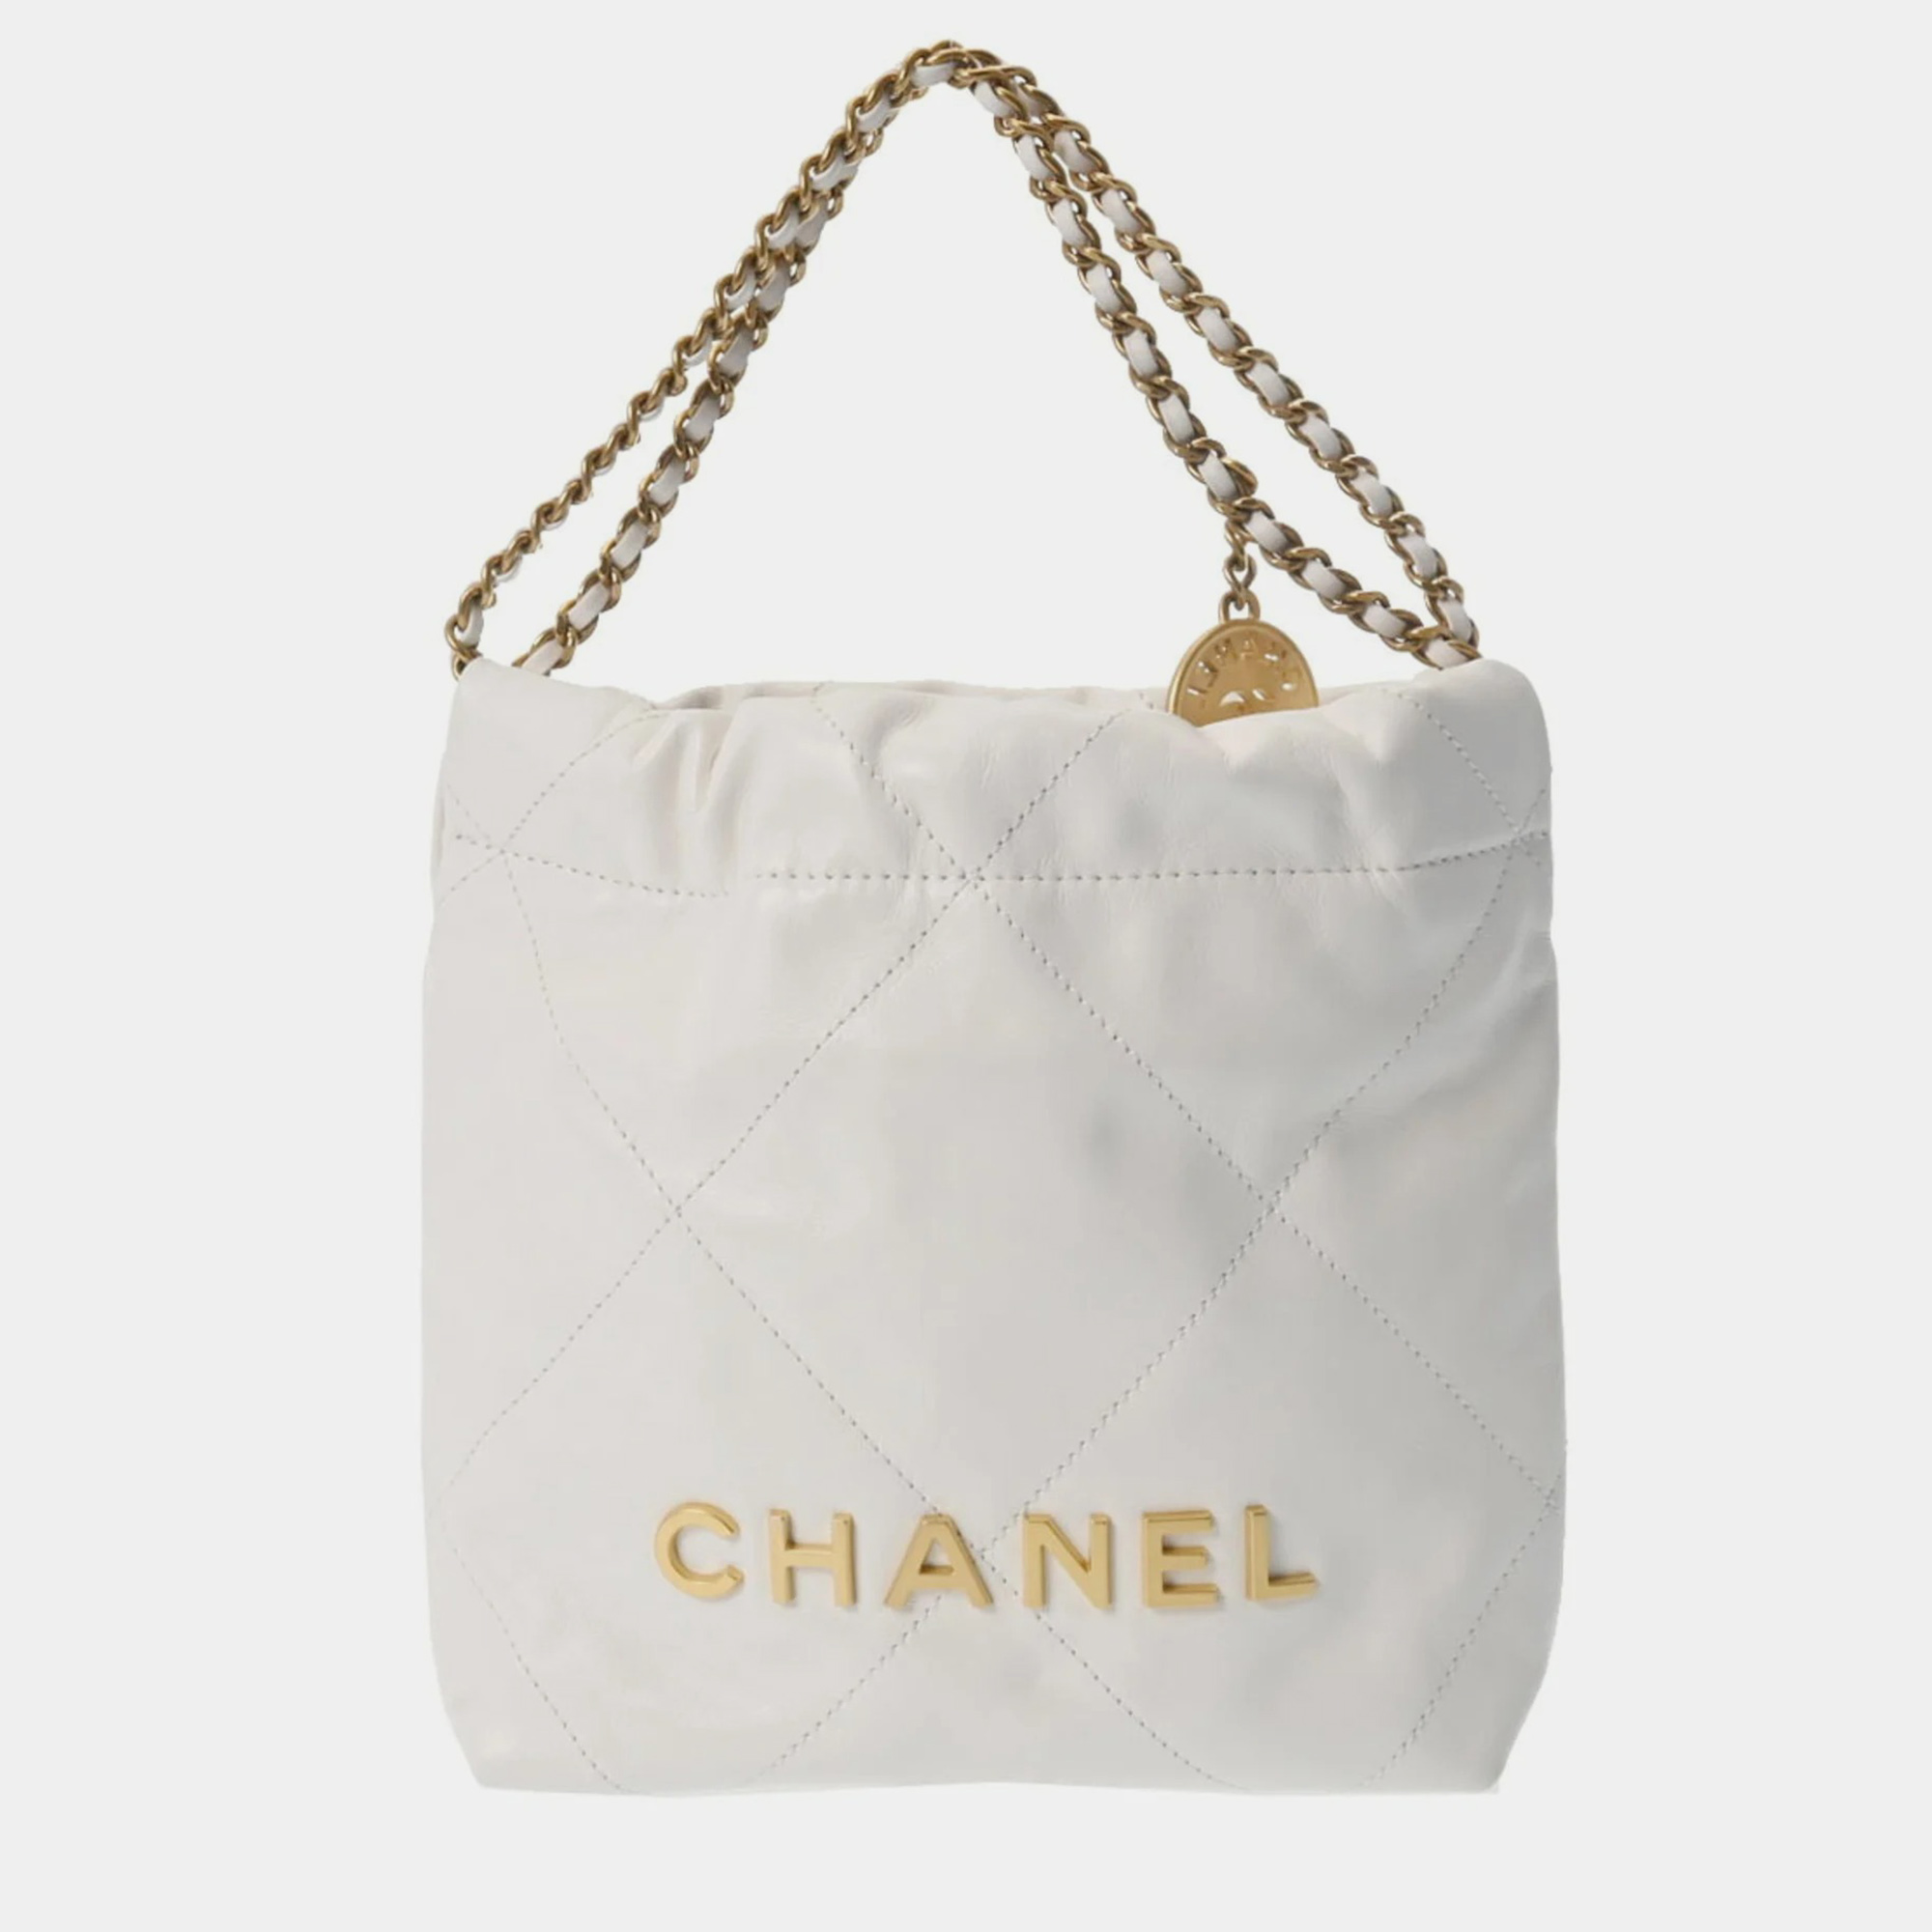 Chanel white leather small 22 hobos